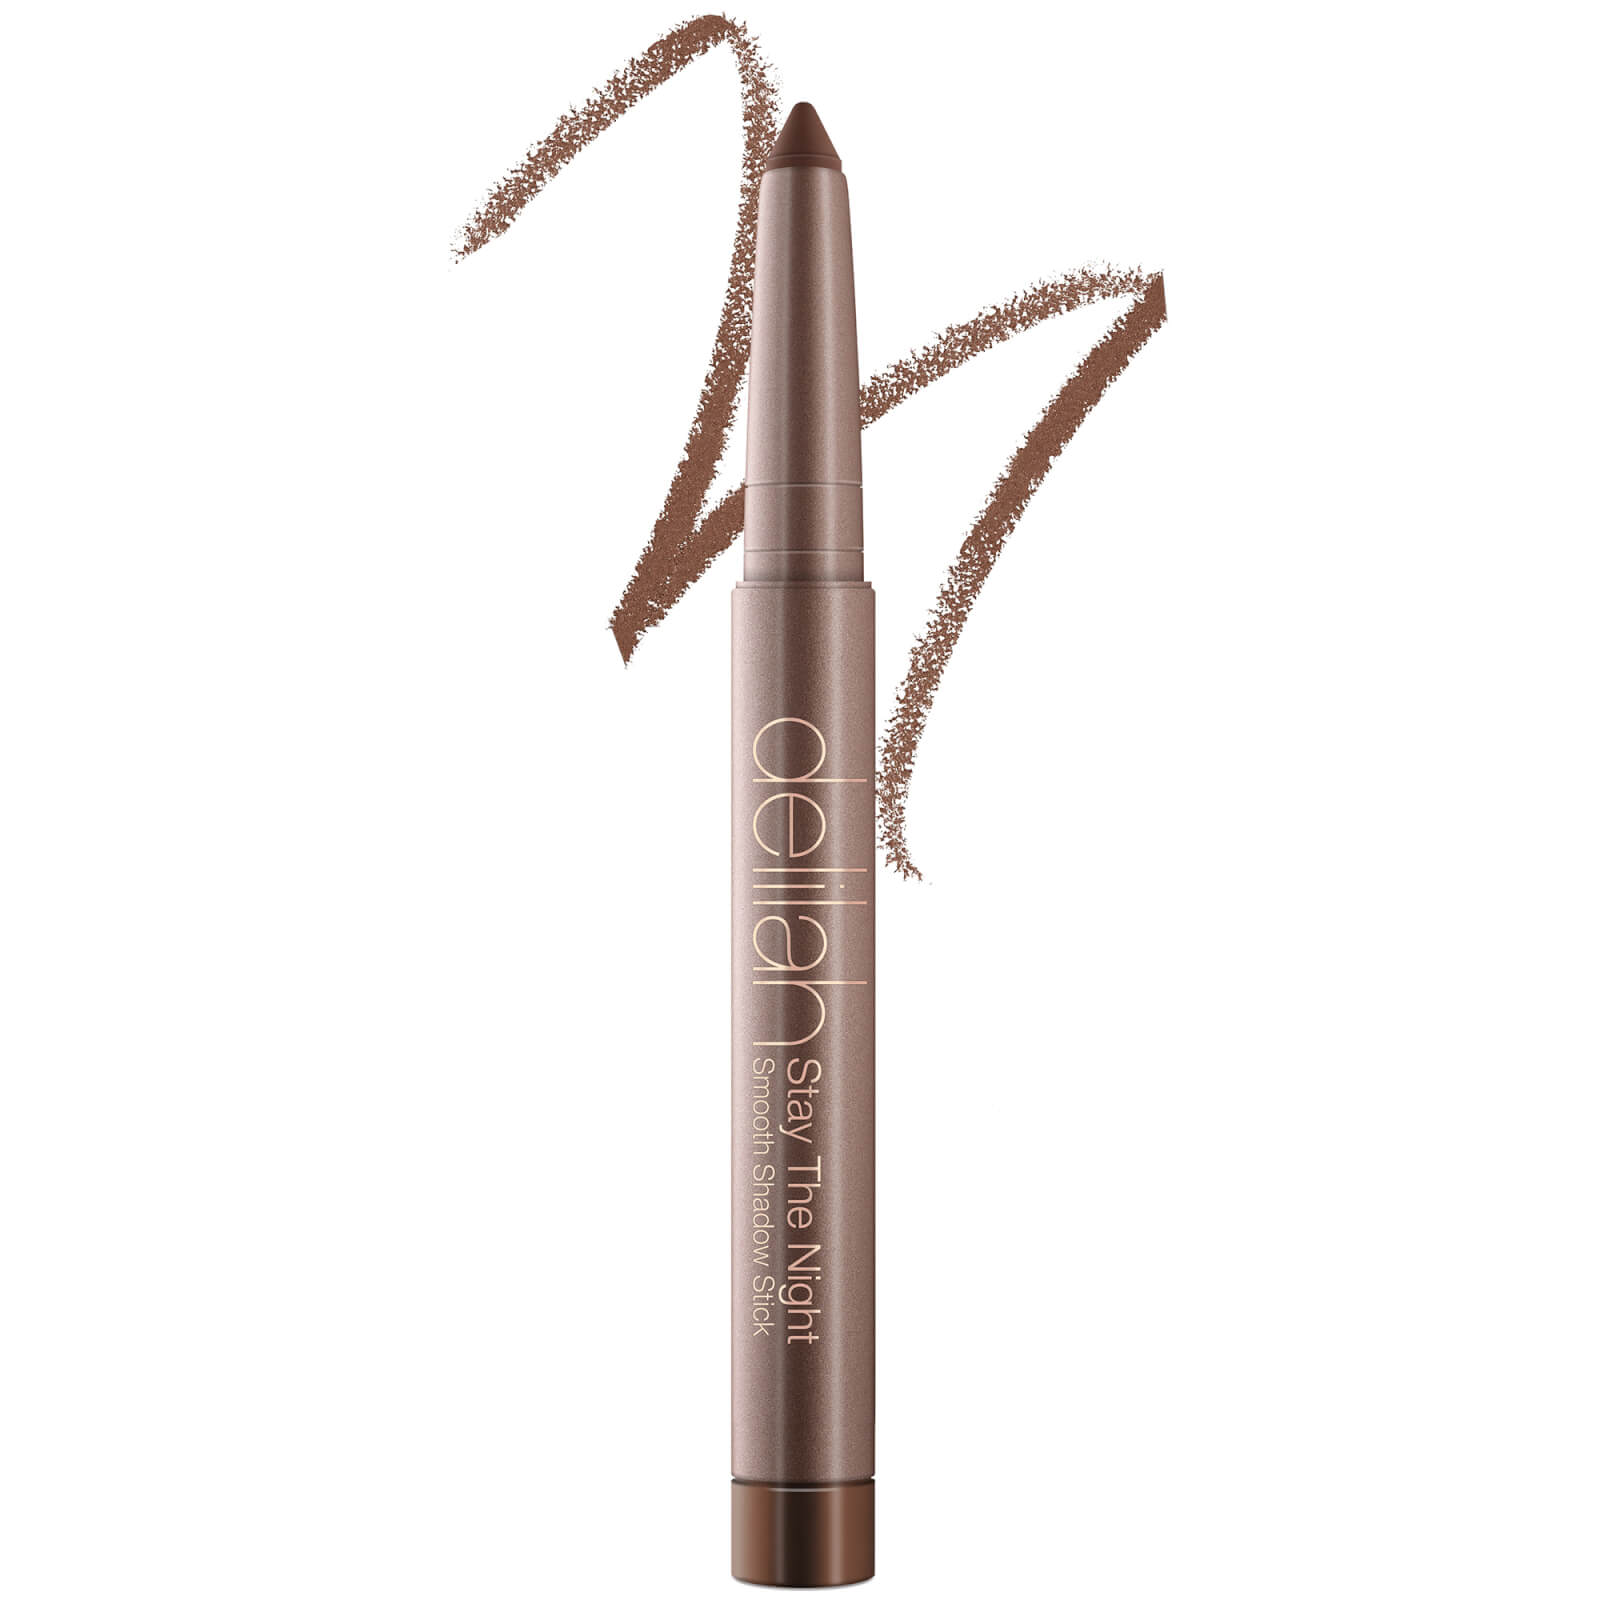 delilah Stay The Night Smooth Shadow Stick 16g (Various Shades) - Hot Chocolate